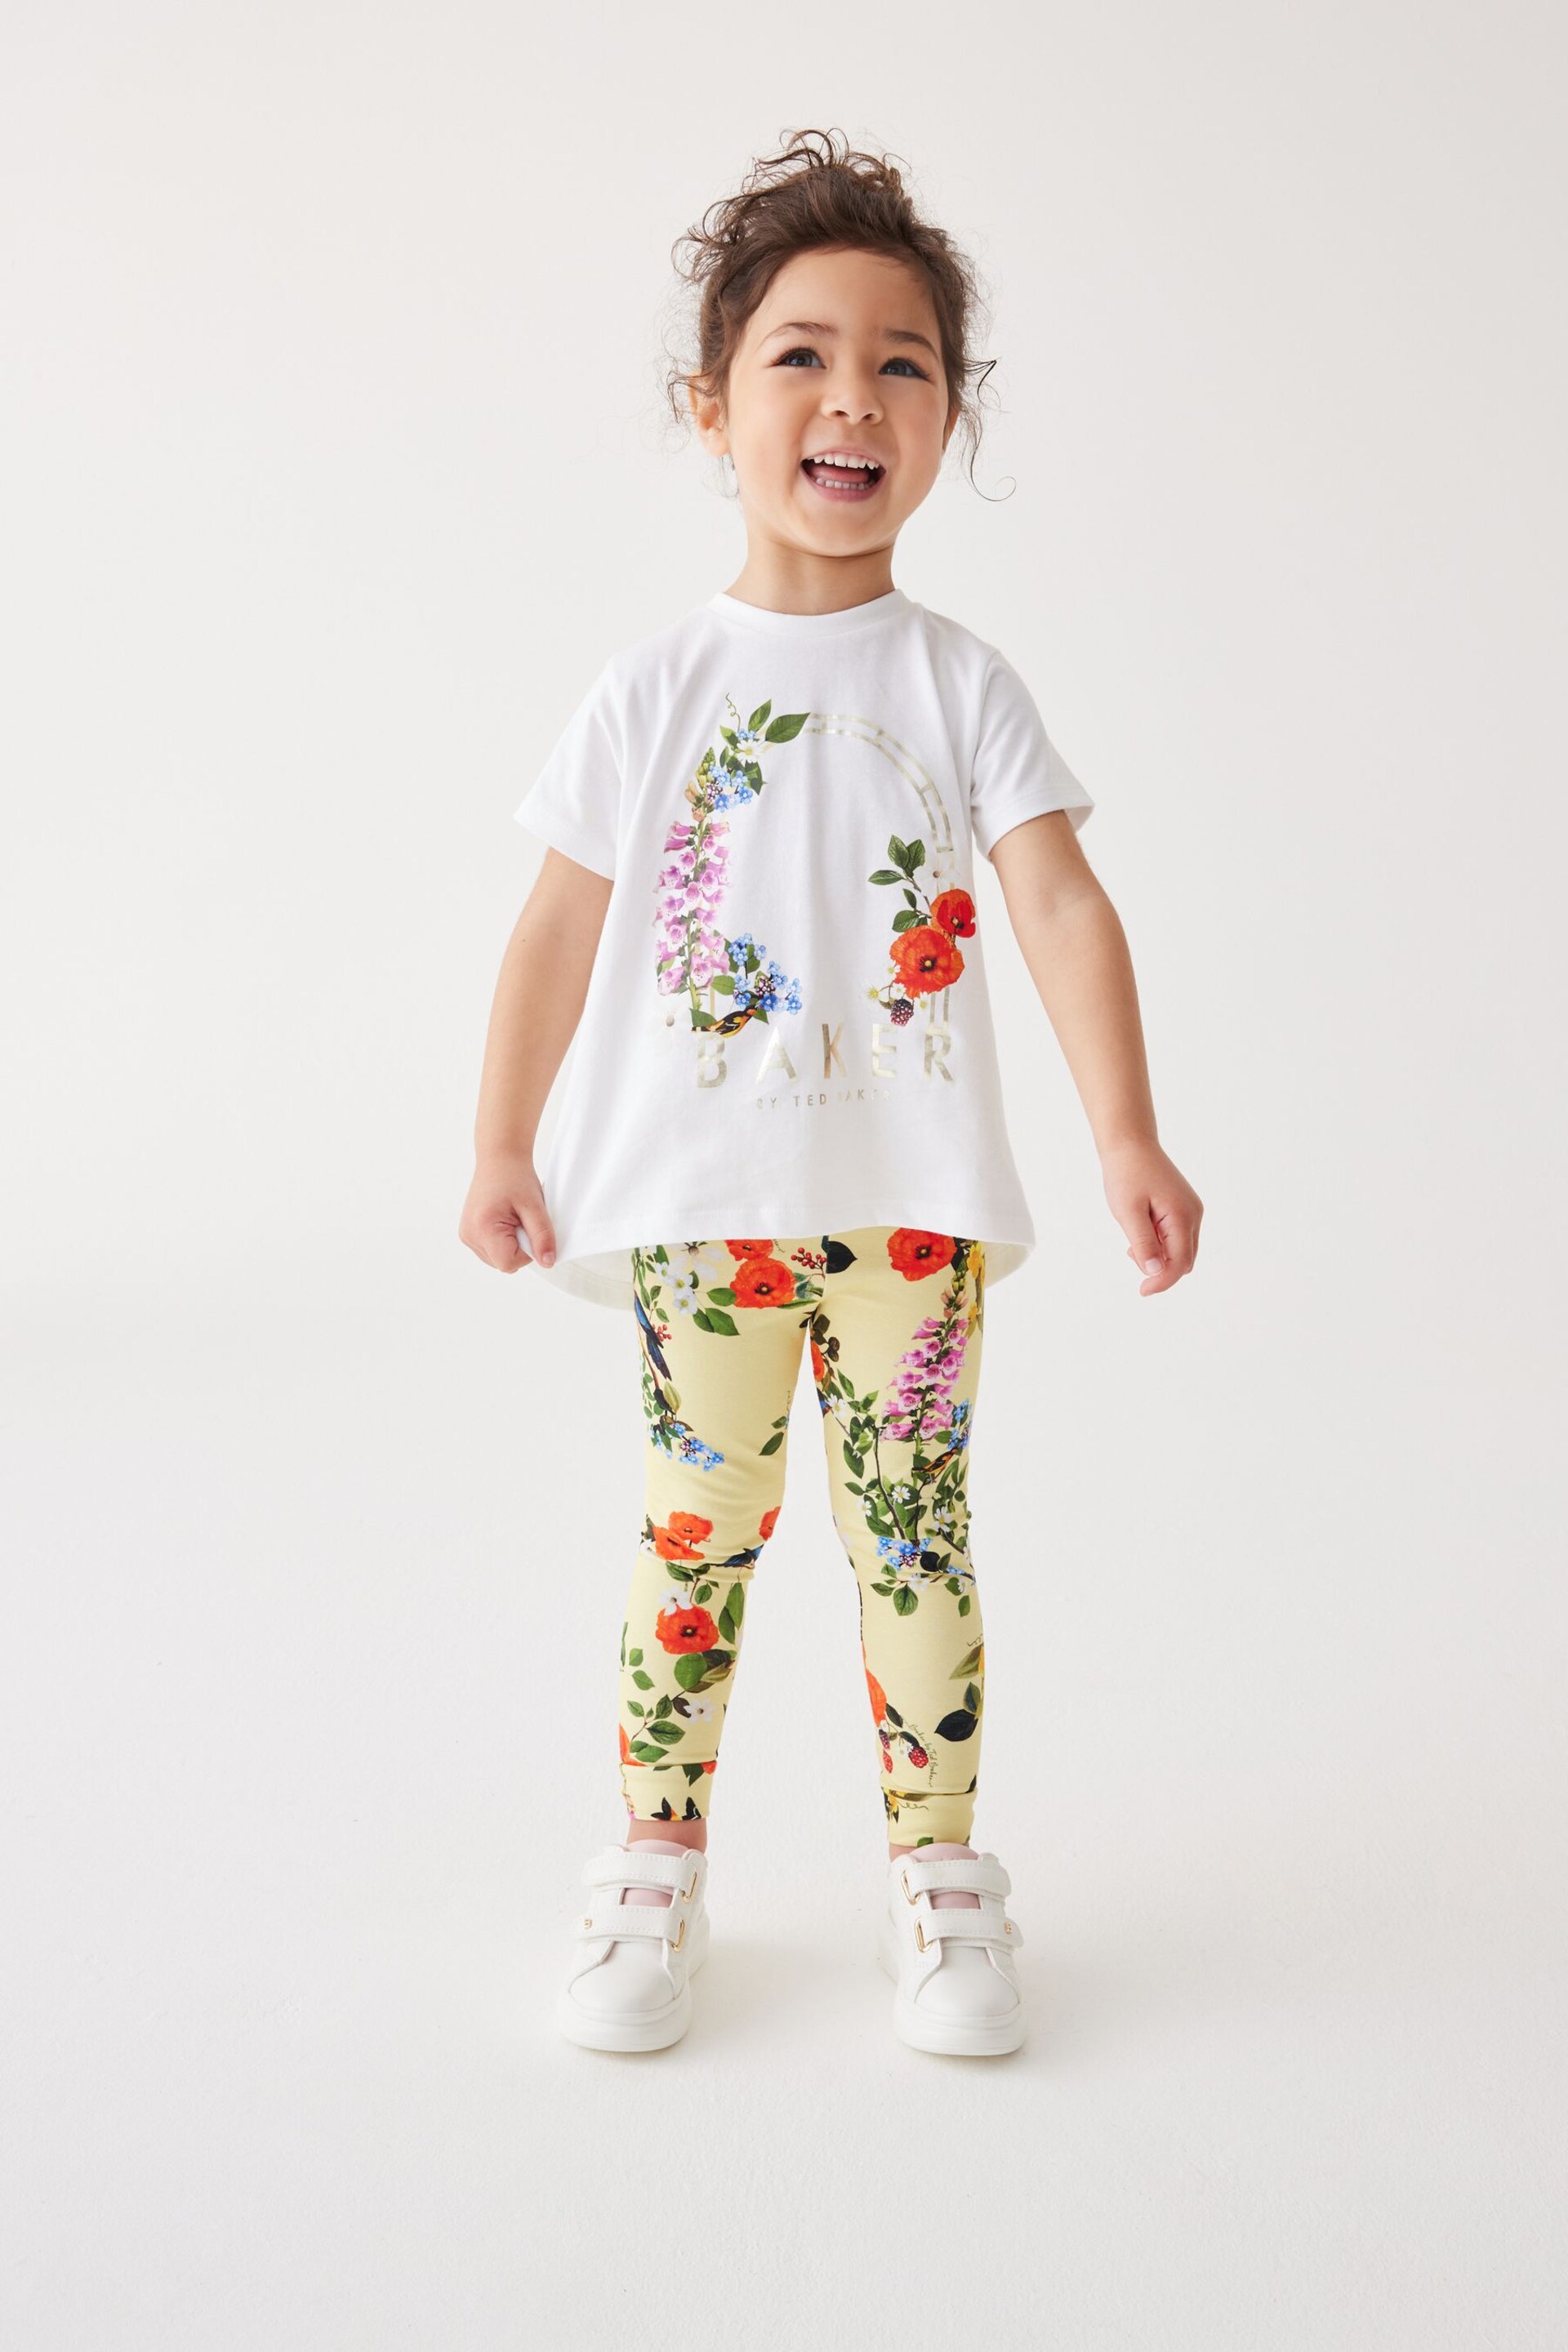 Baker by Ted Baker Yellow Floral T-Shirt And Leggings Set - Image 2 of 13